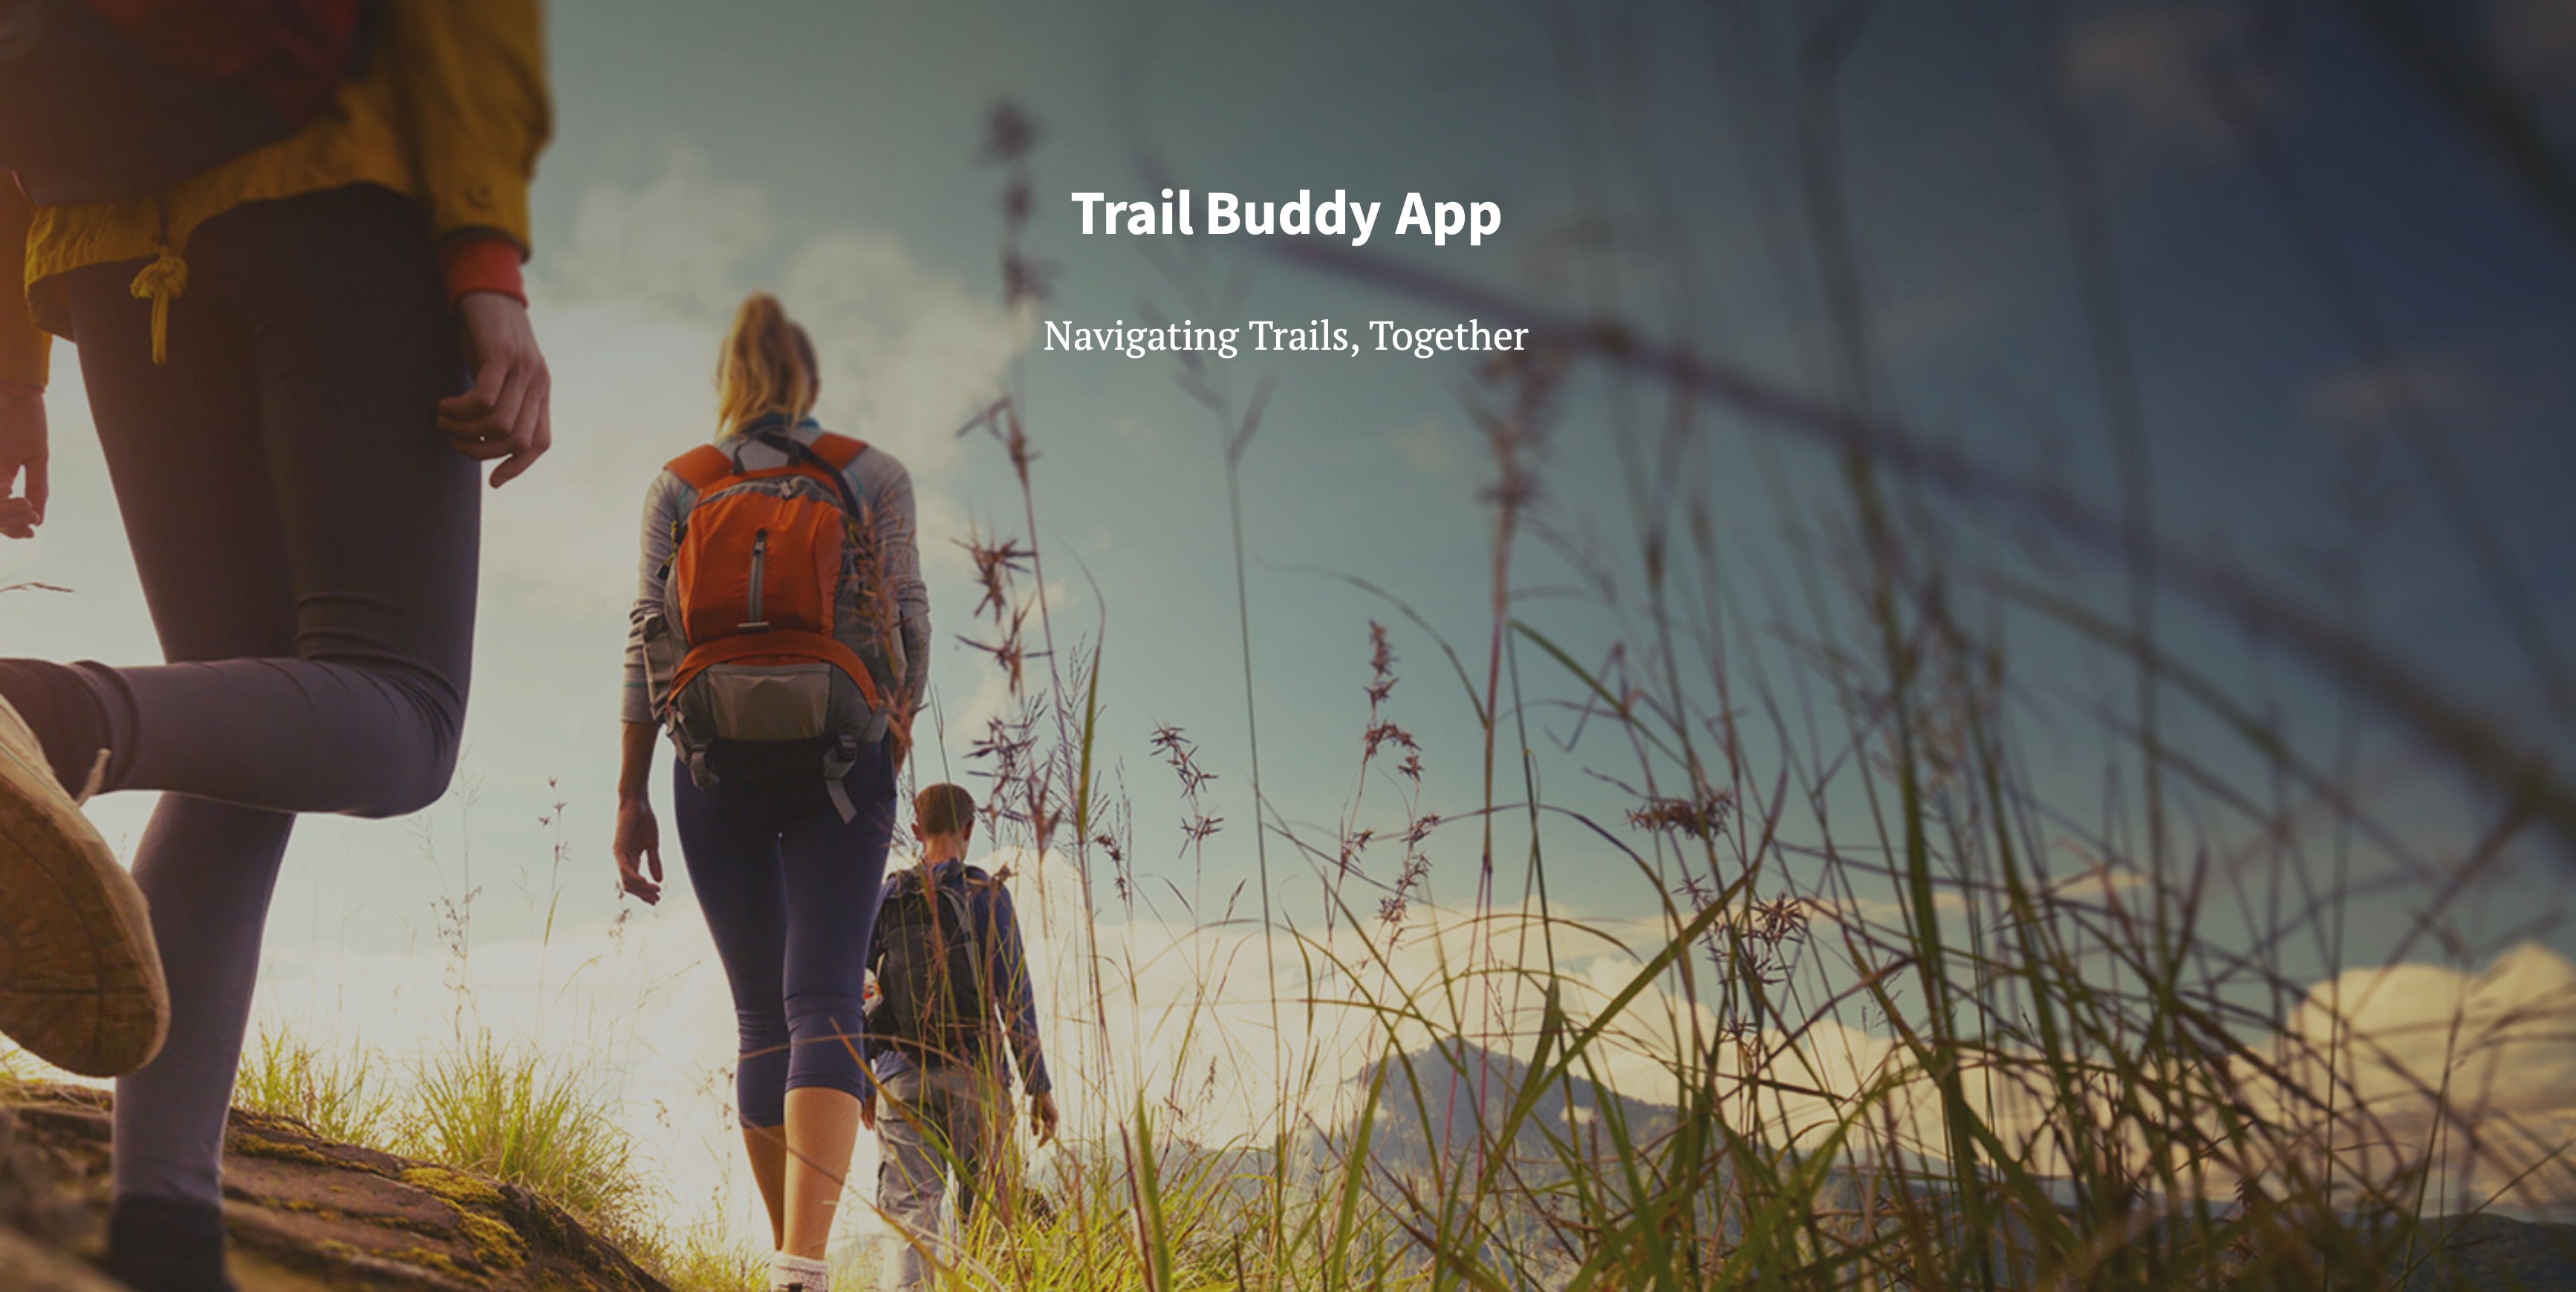 Enjoy Trail Buddy Inc stories, opinion, and features from across